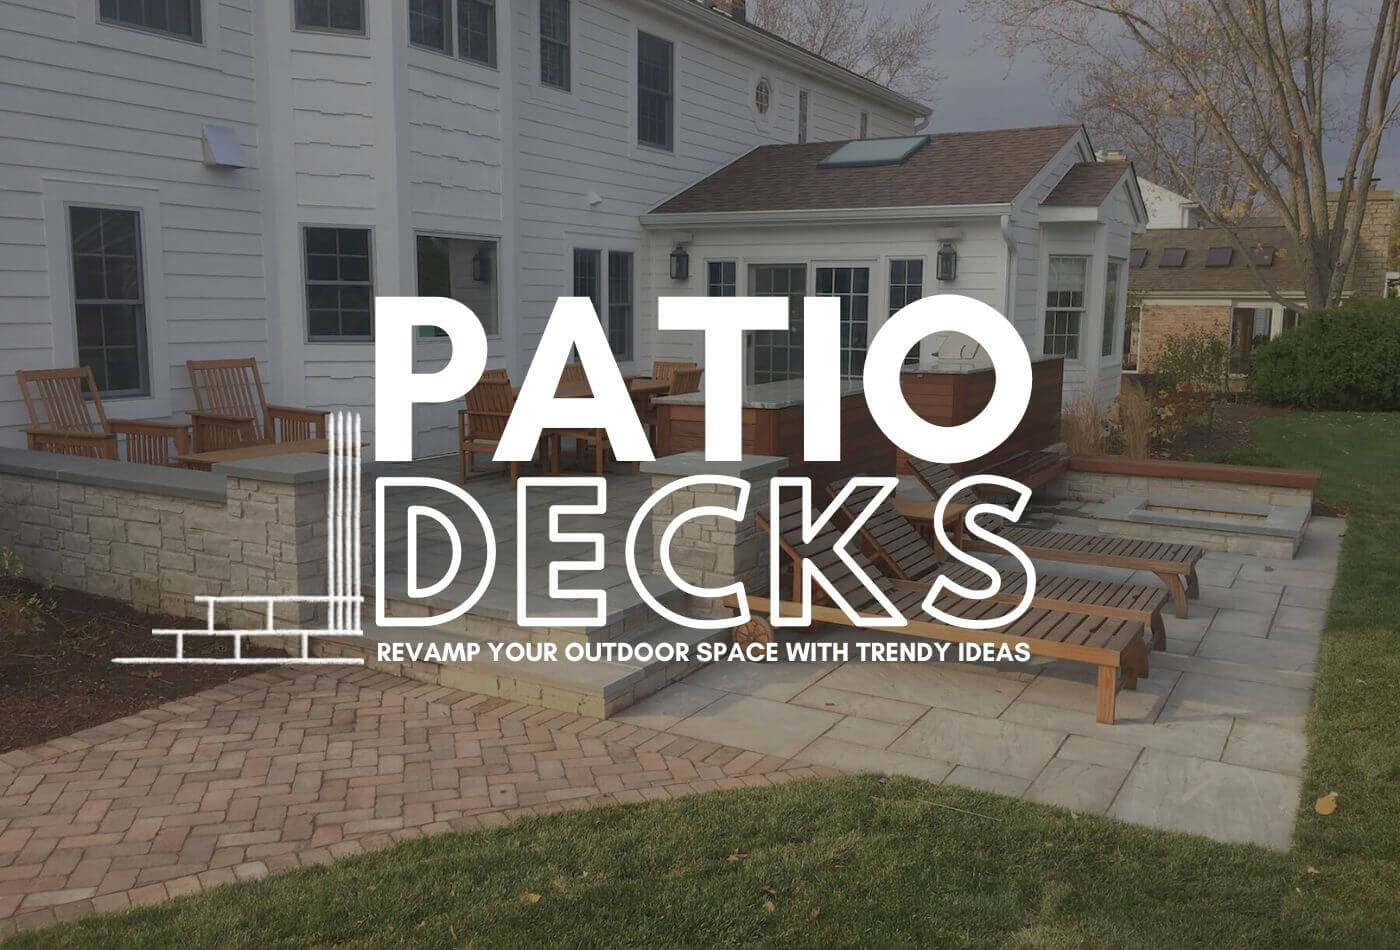 Patio Decks - Revamp Your Outdoor Space With Trendy Ideas